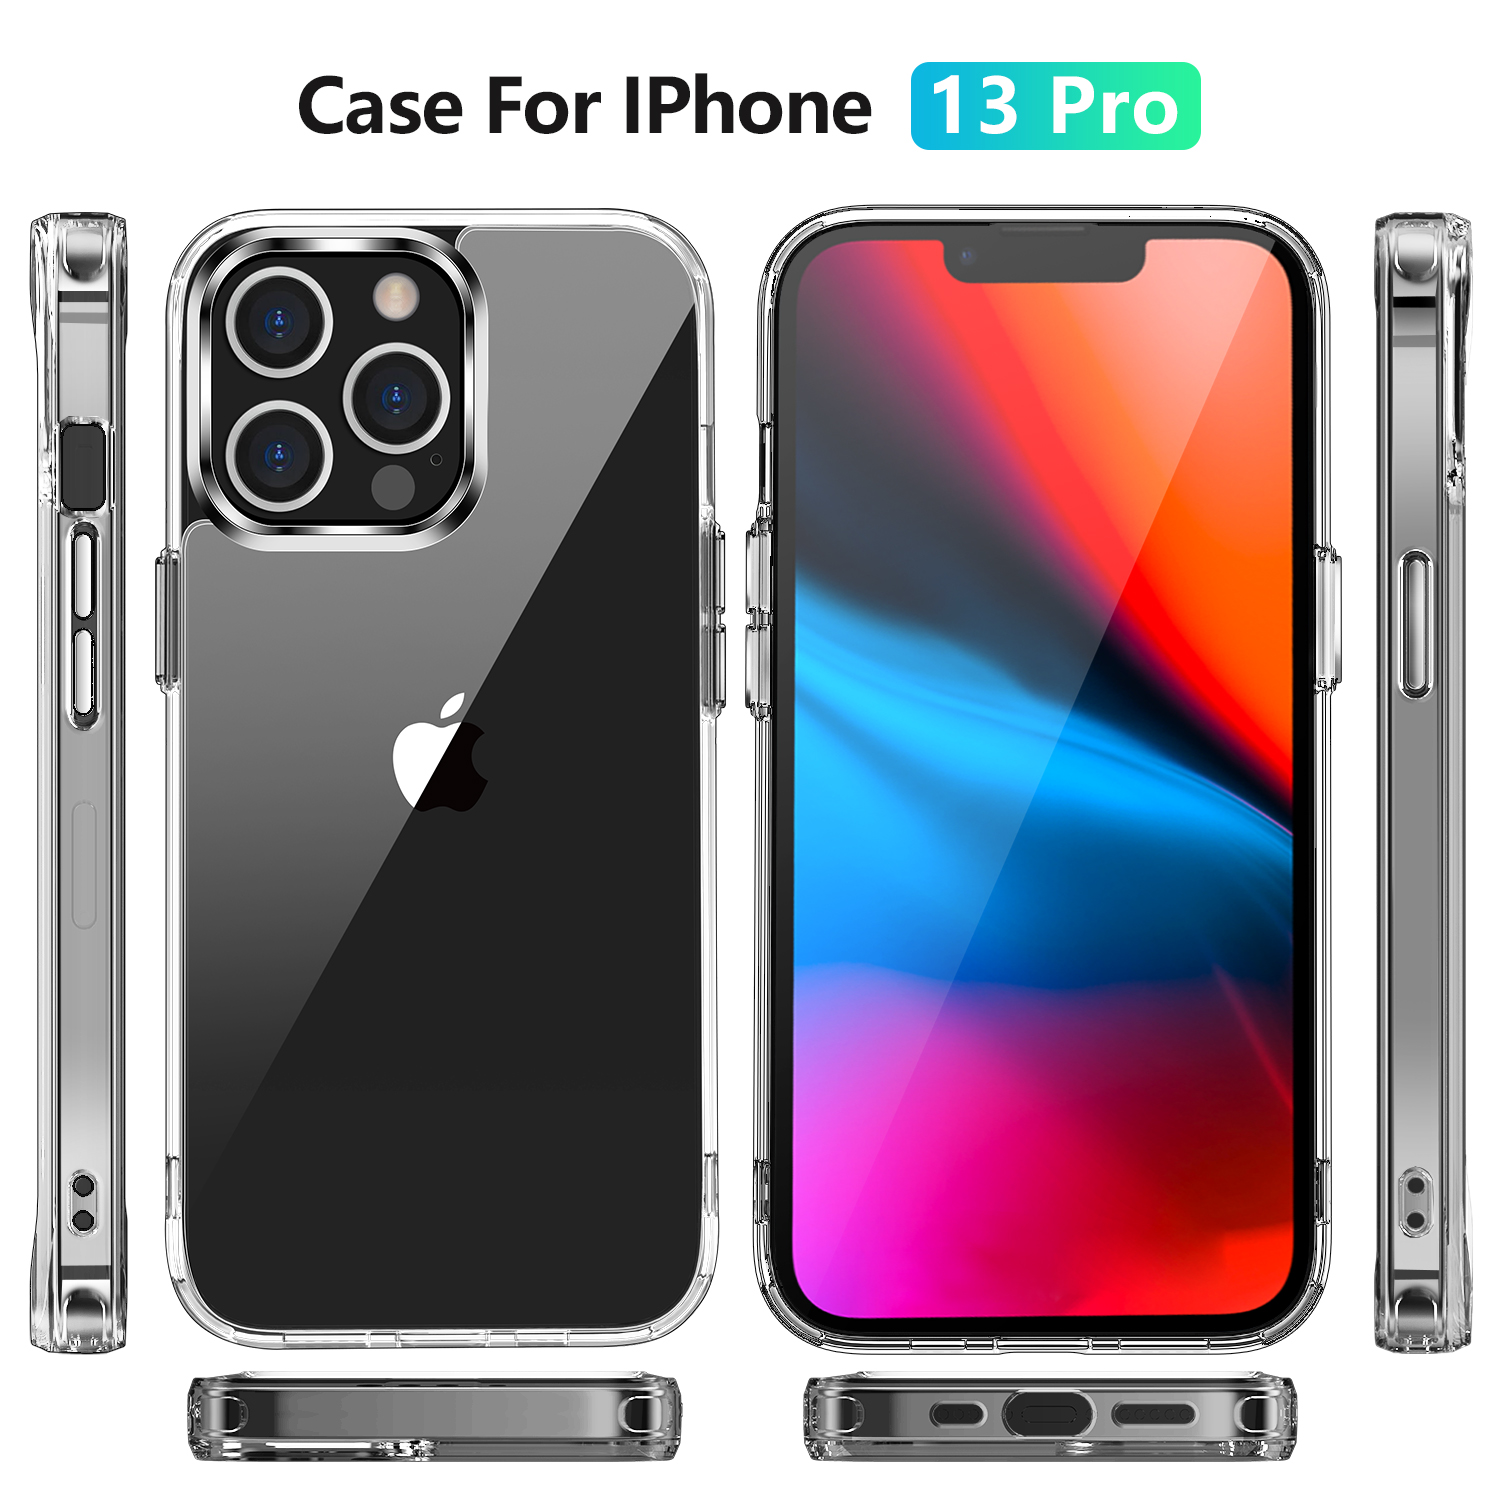 iphone13procase-iphone13hardcasewithTPUbumper-metalbutton-iphone13hardcasewithTPUbumper-metalbutton-1